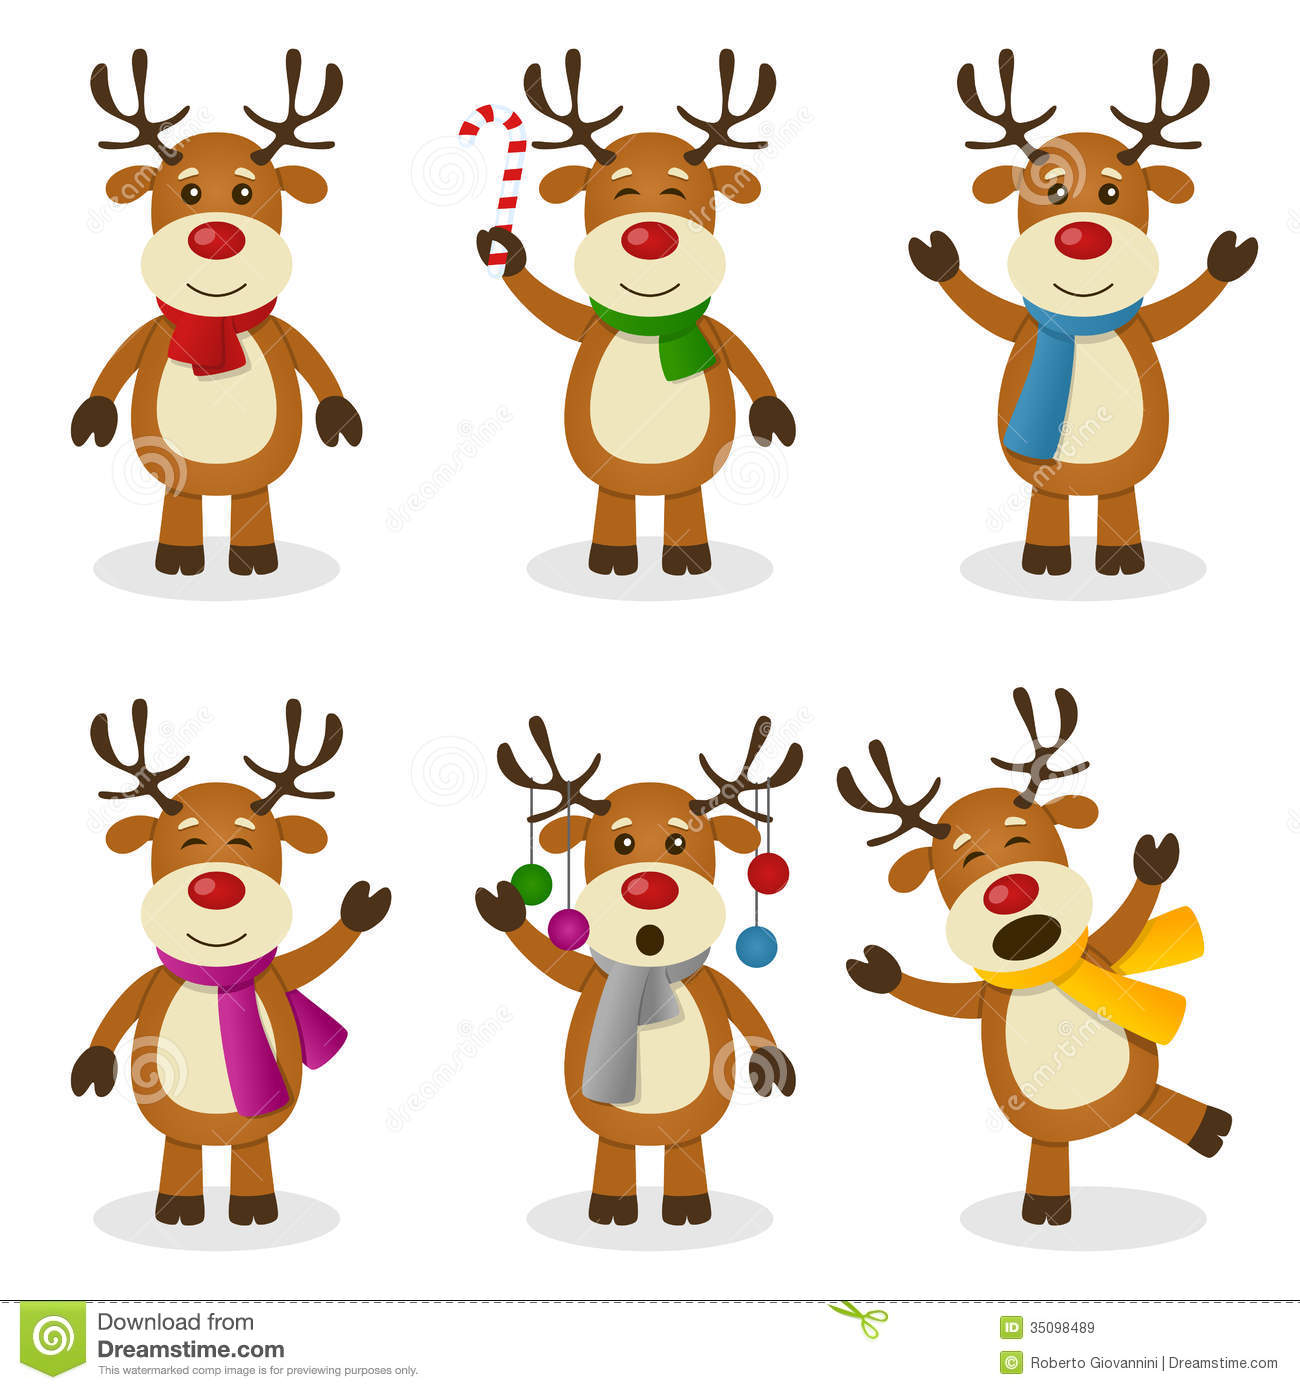 Animated Christmas Clipart Pictures Of Animals   School Clipart